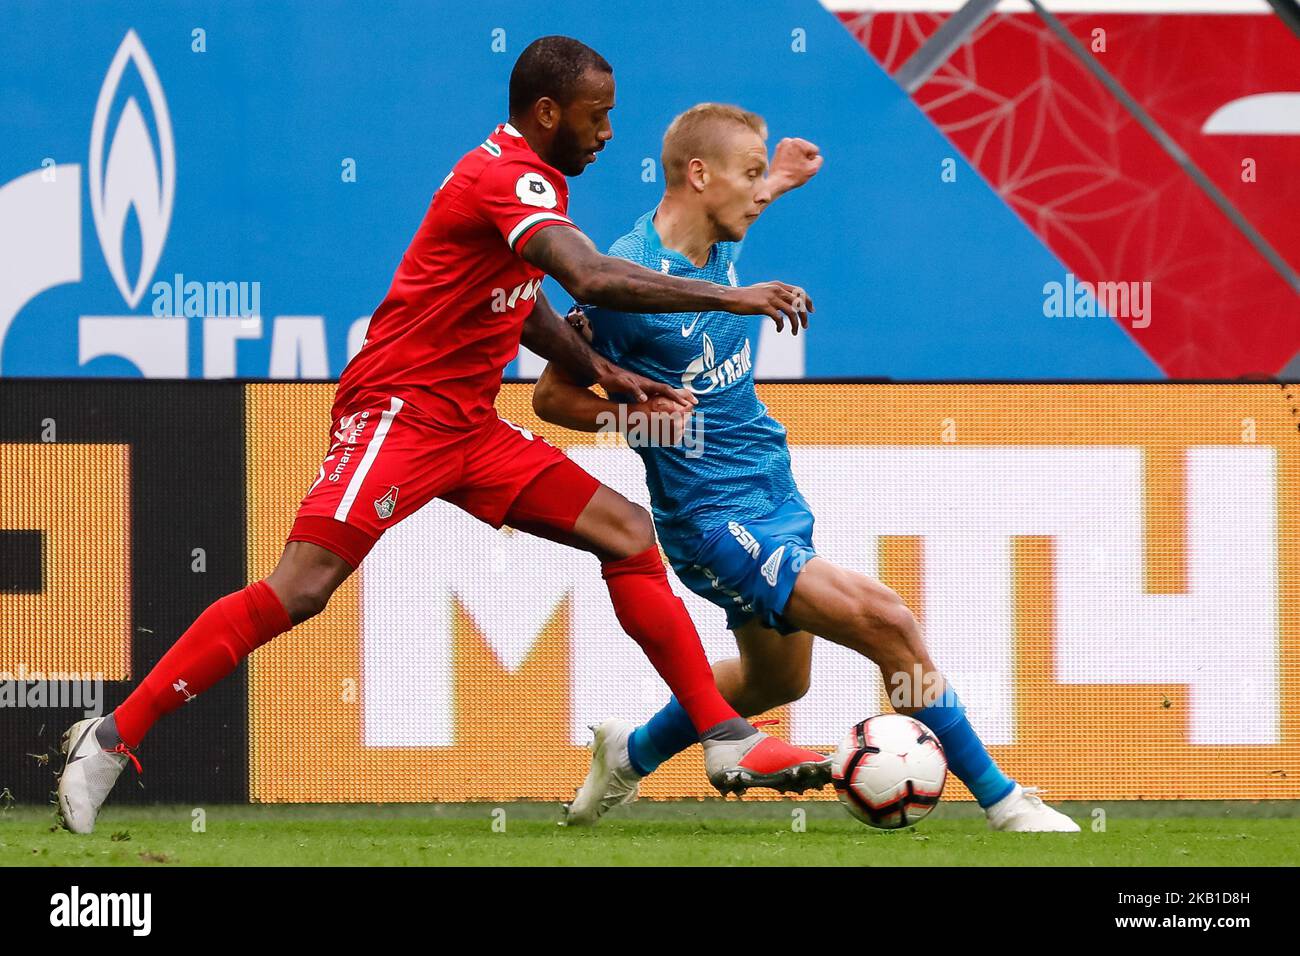 Igor Smolnikov (R) of FC Zenit Saint Petersburg and Manuel Fernandes of FC Lokomotiv Moscow vie for the ball during the Russian Premier League match between FC Zenit Saint Petersburg and FC Lokomotiv Moscow on September 23, 2018 at Saint Petersburg Stadium in Saint Petersburg, Russia. (Photo by Mike Kireev/NurPhoto) Stock Photo